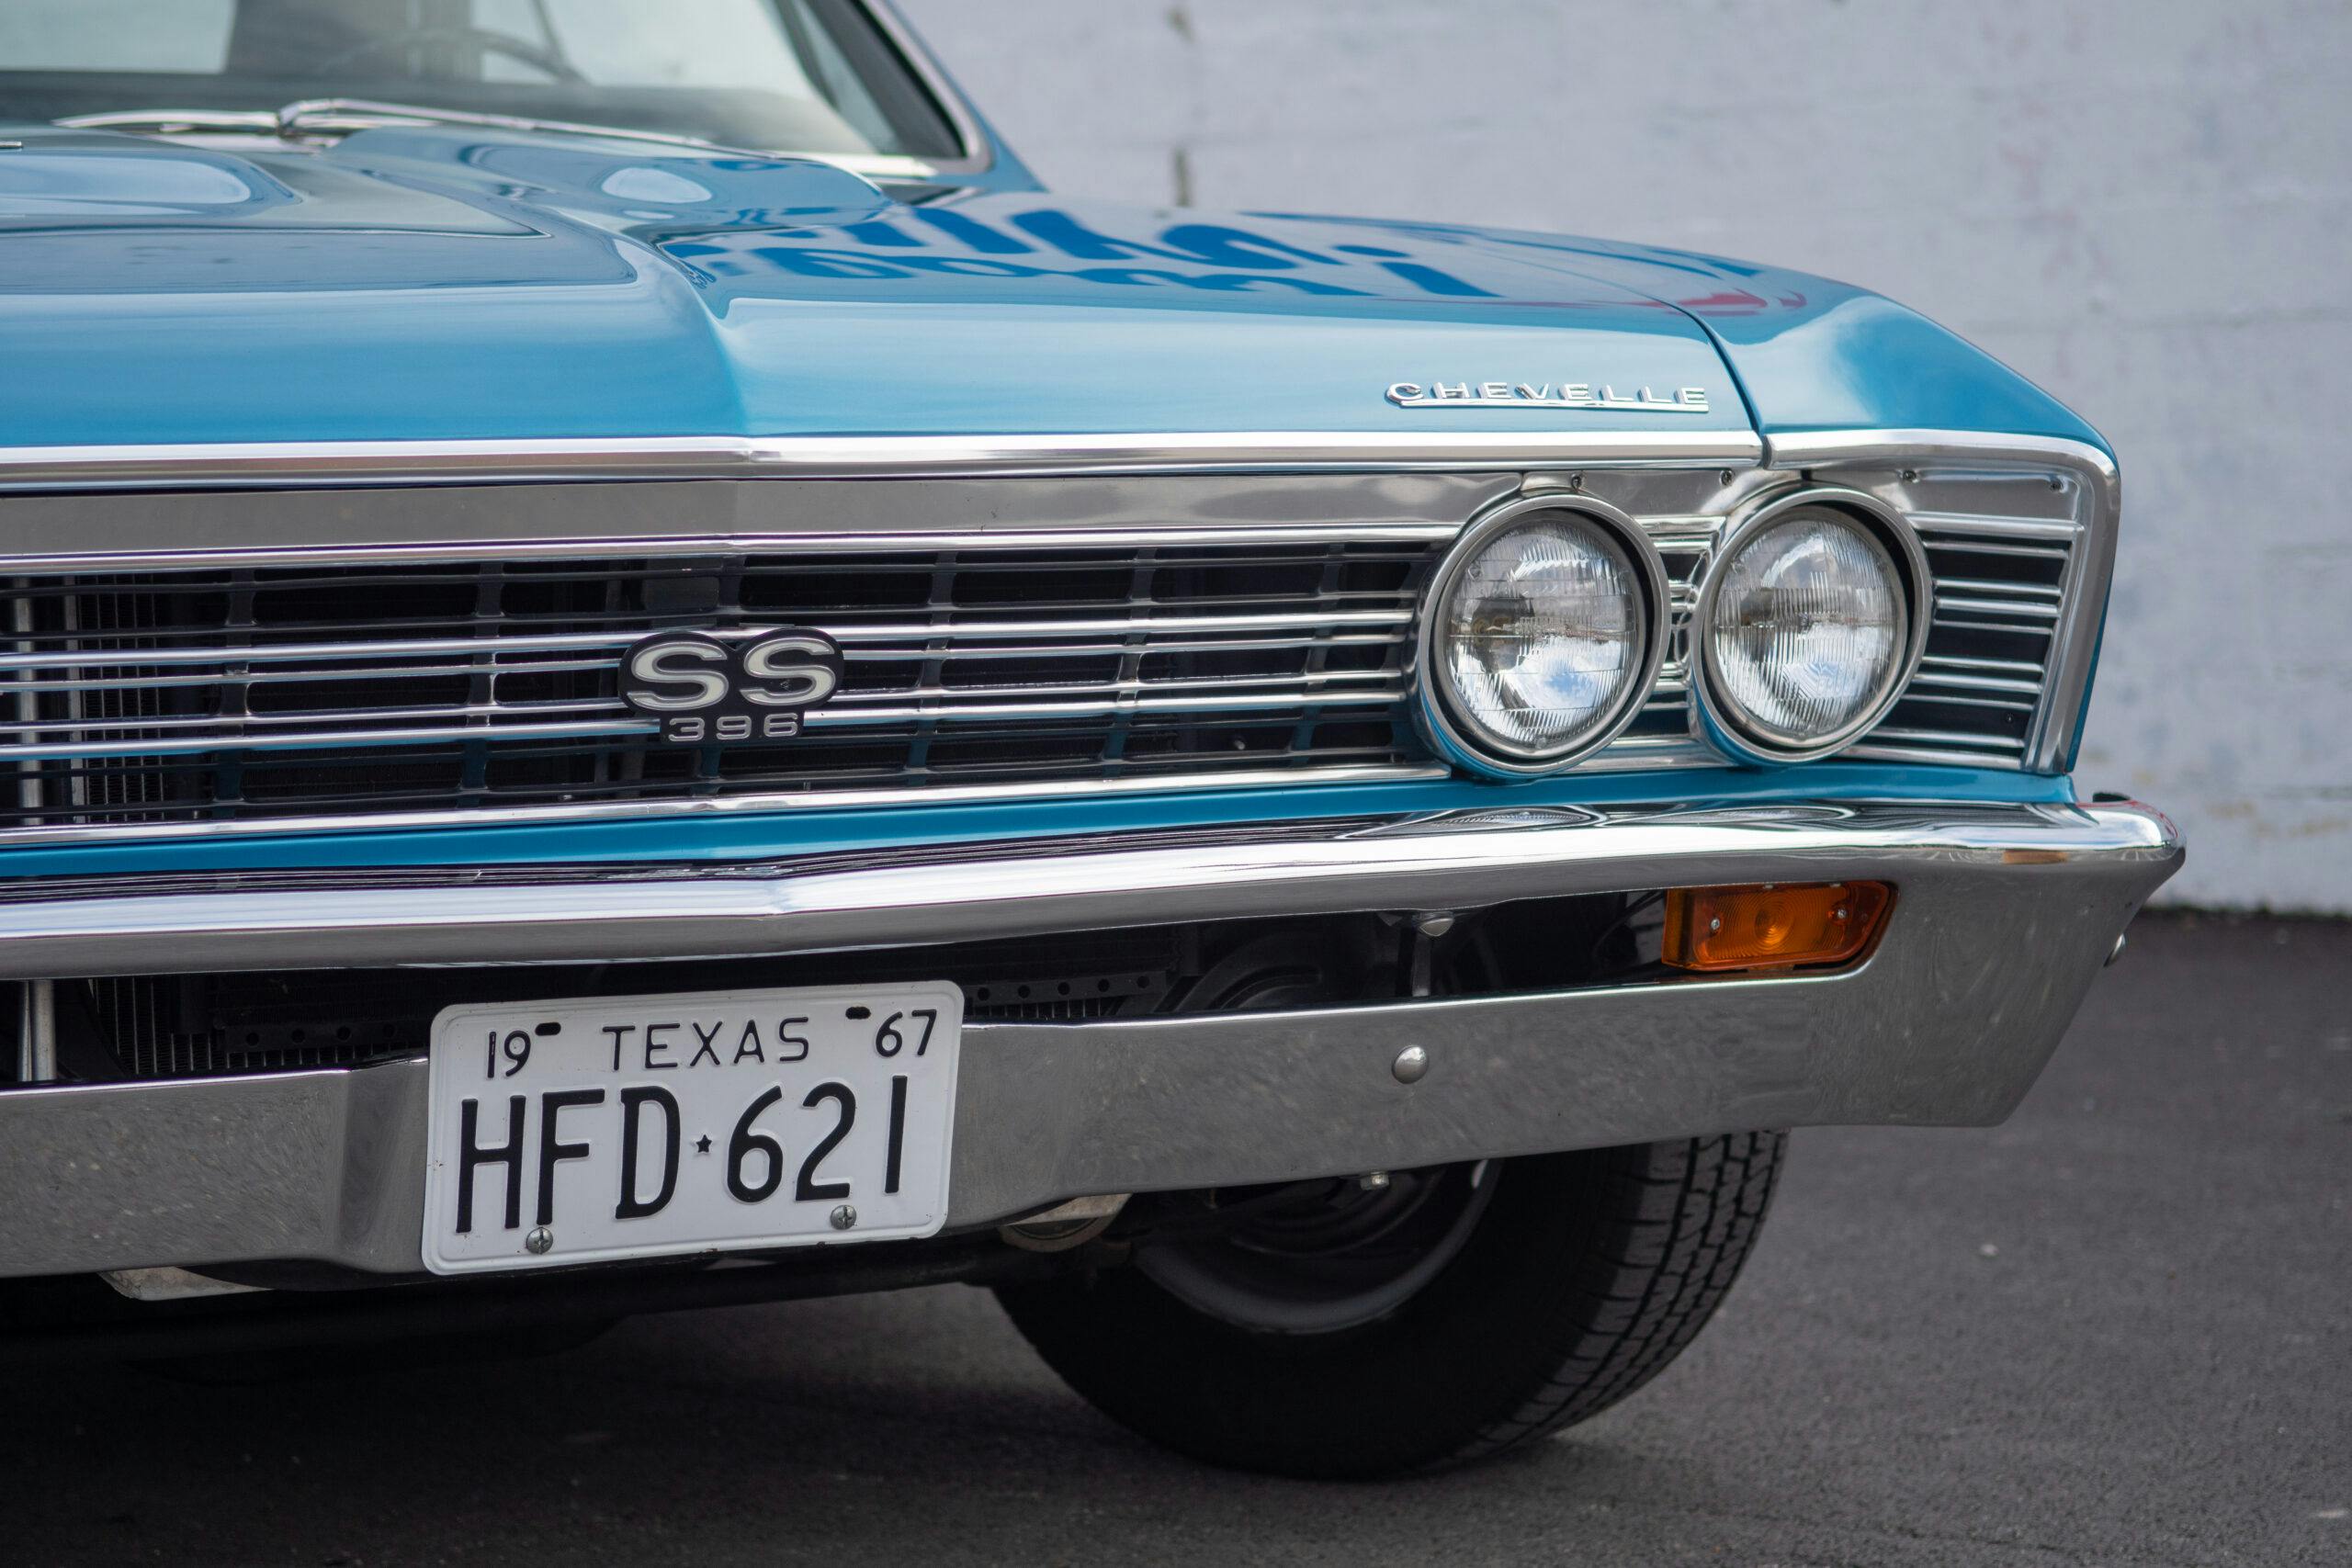 Chevelle SS grille closeup